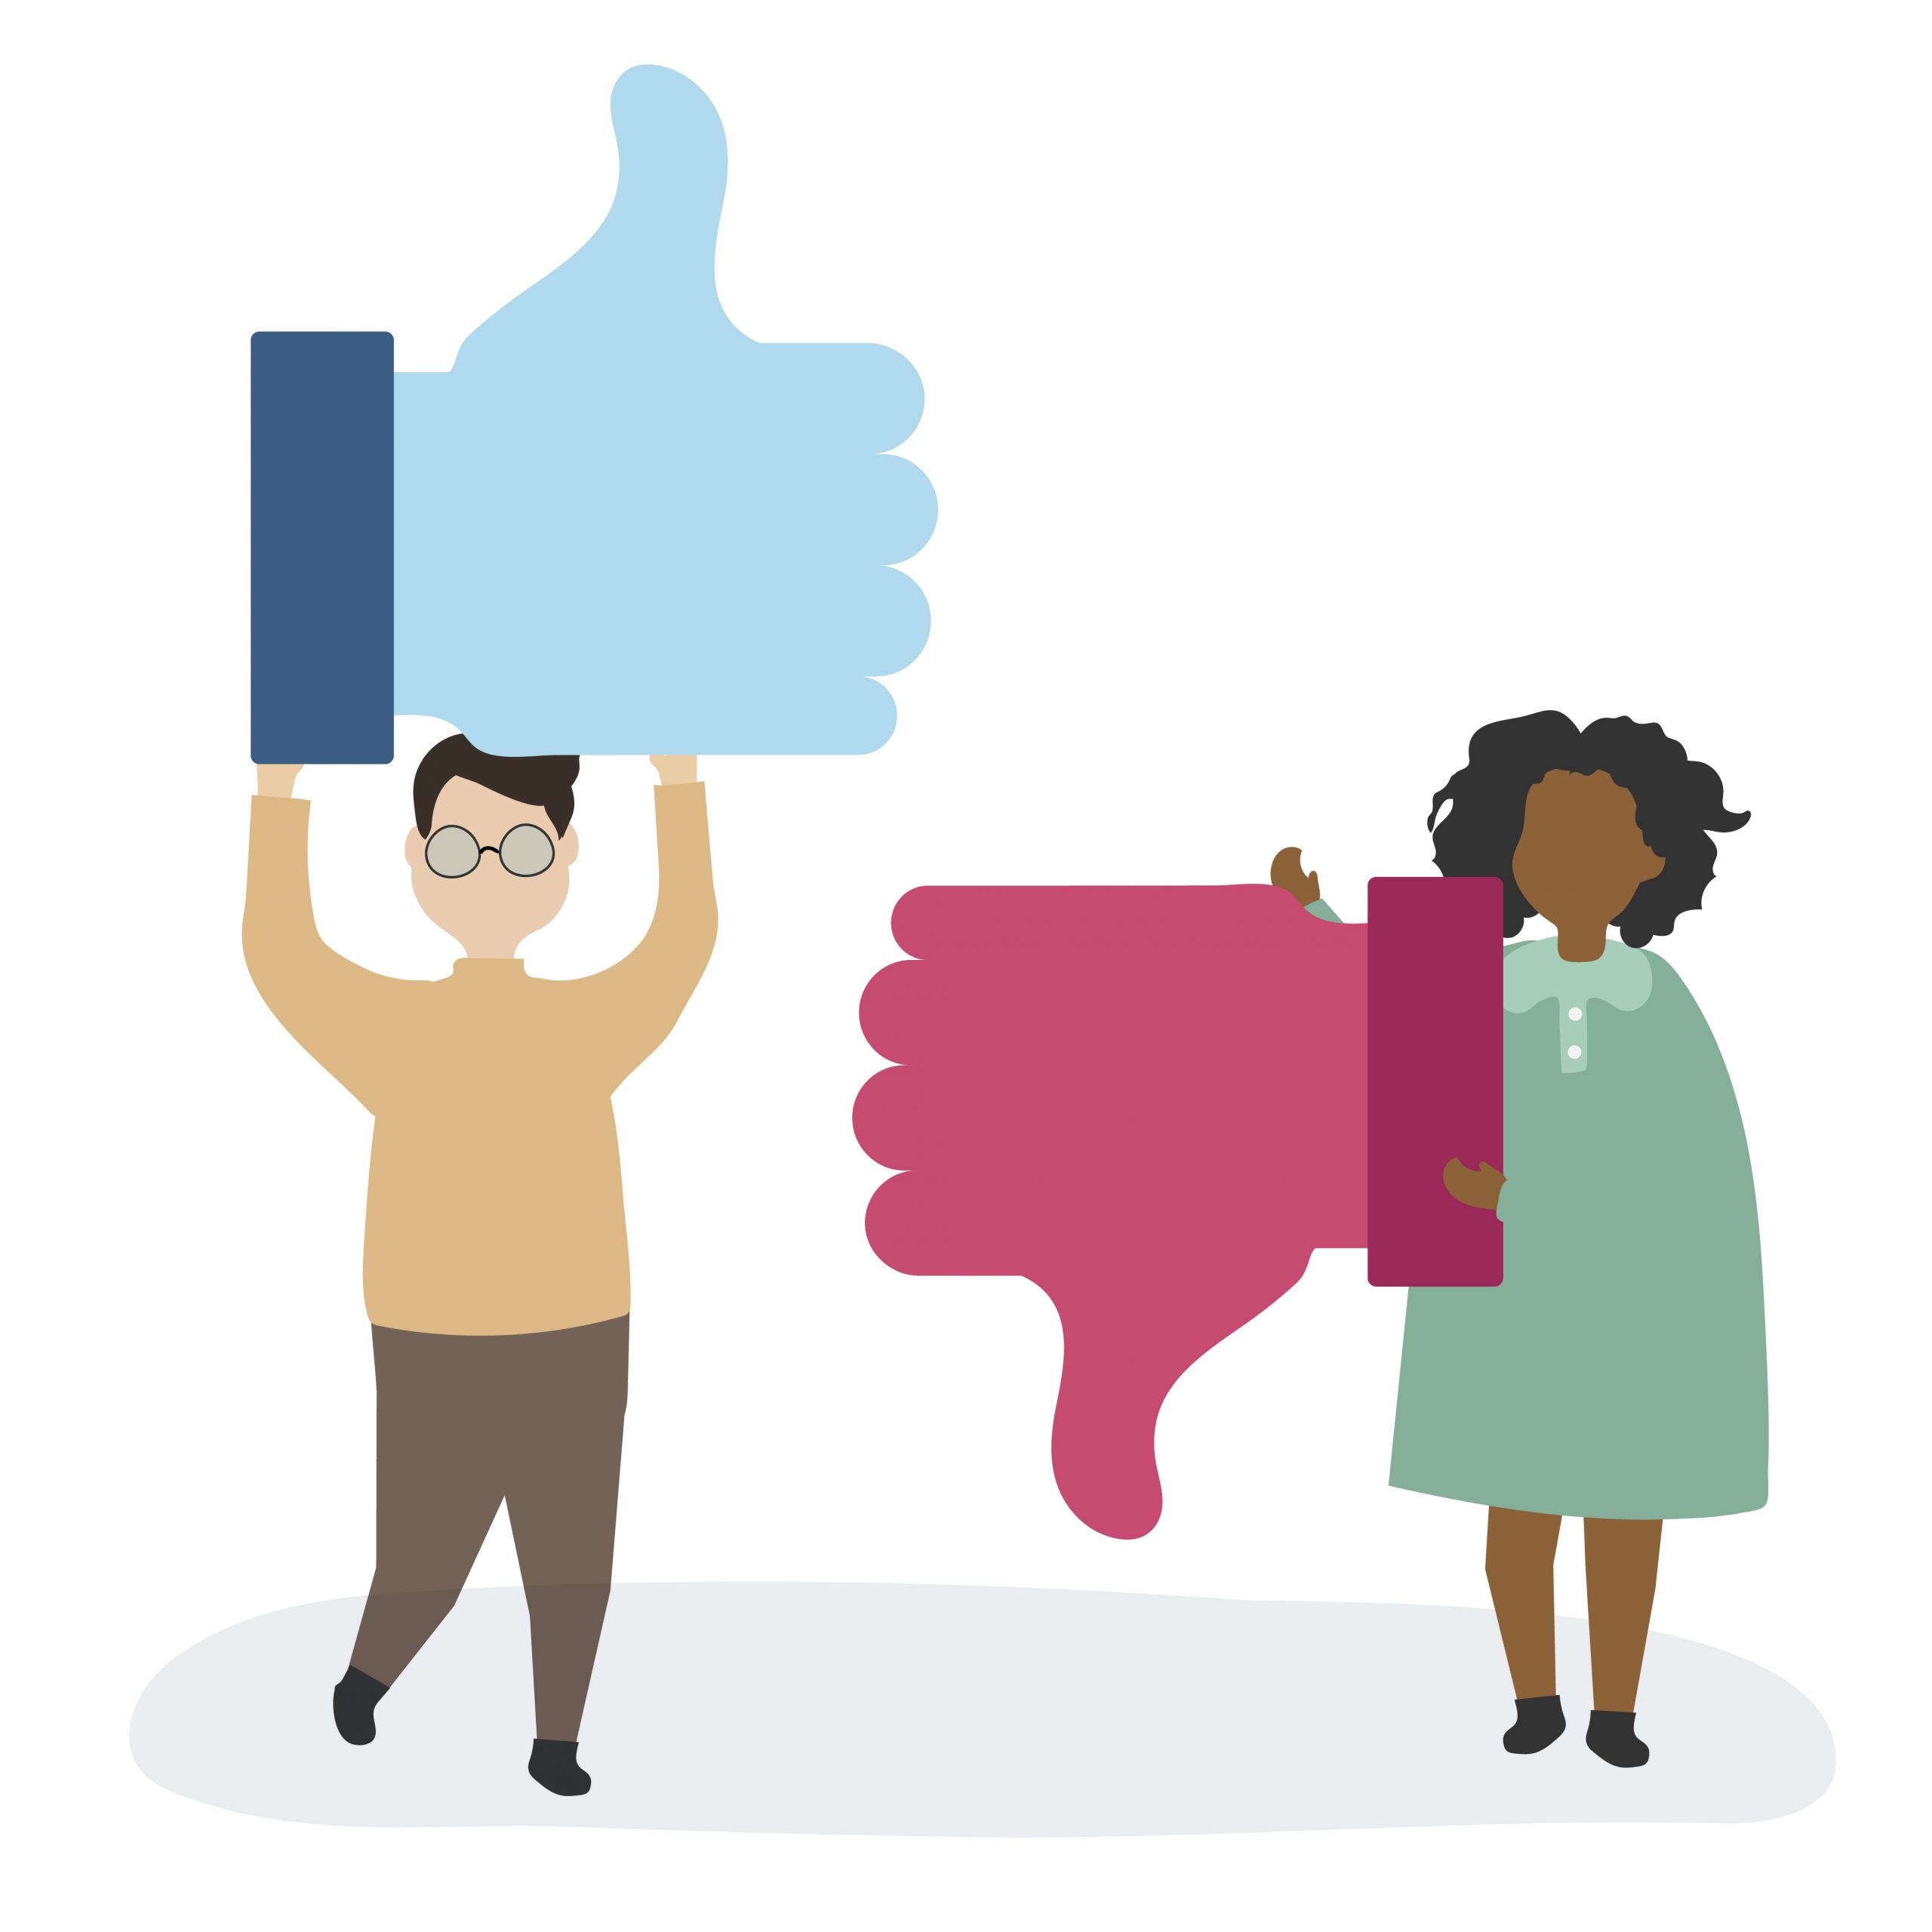 A man holding a Like symbol/Thumbs up and a woman holding a Dislike symbol/Thumbs down